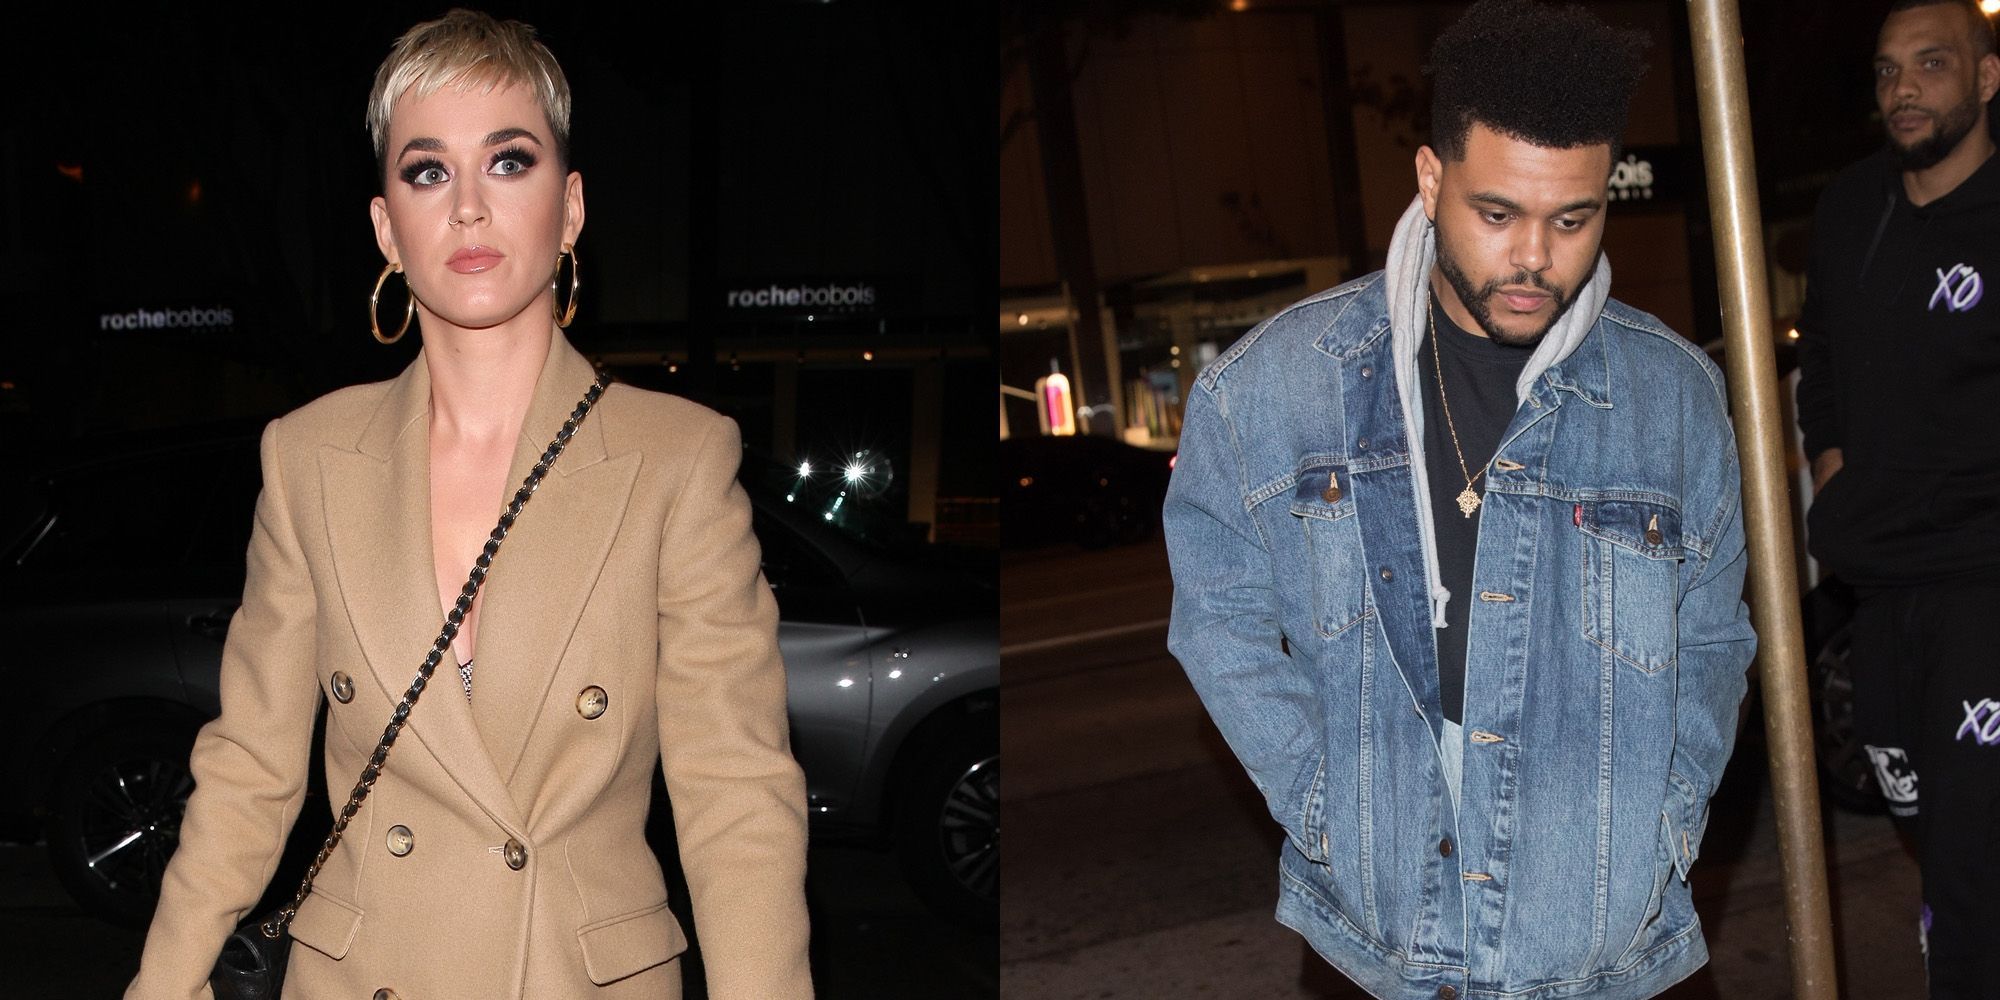 Katy Perry sparks romance rumours with The Weeknd as they step out